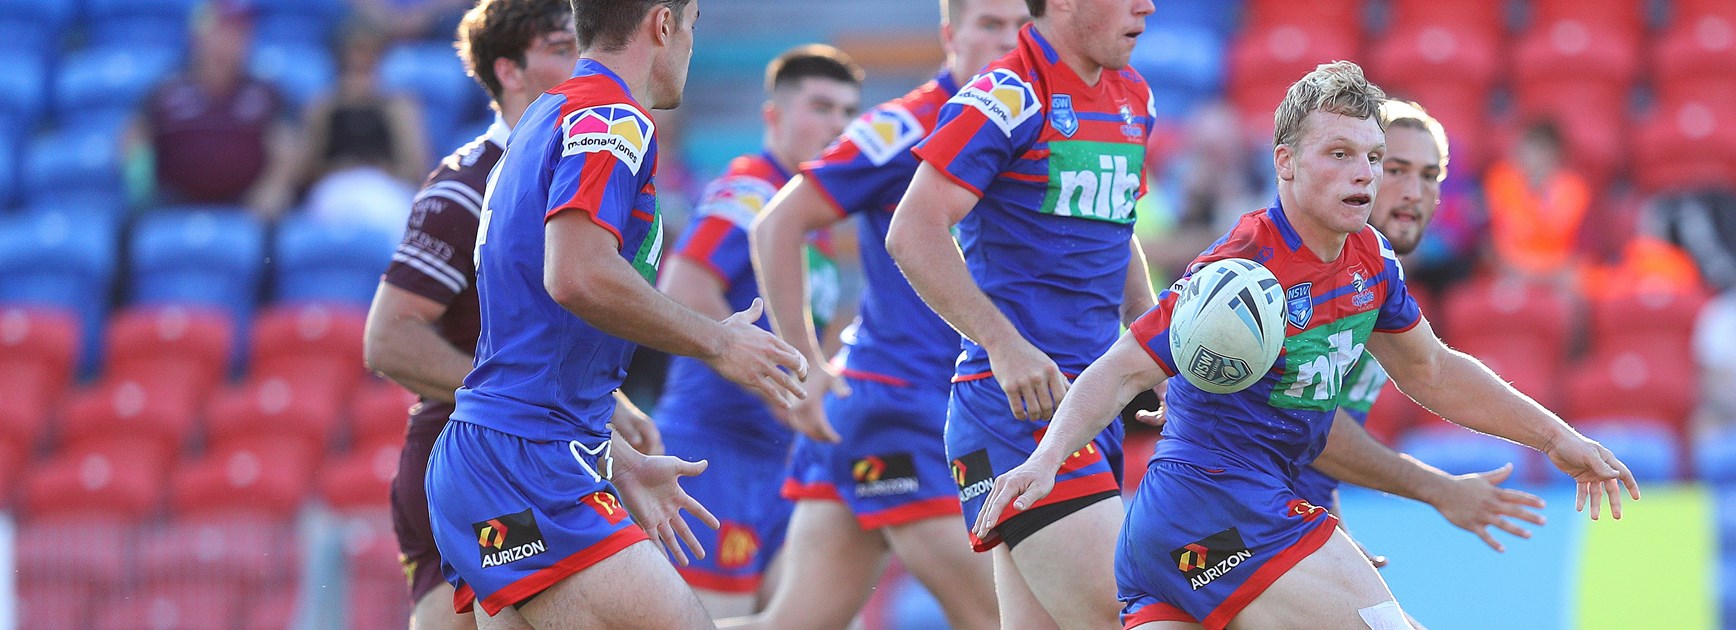 Tigers too strong for Jersey Flegg Knights